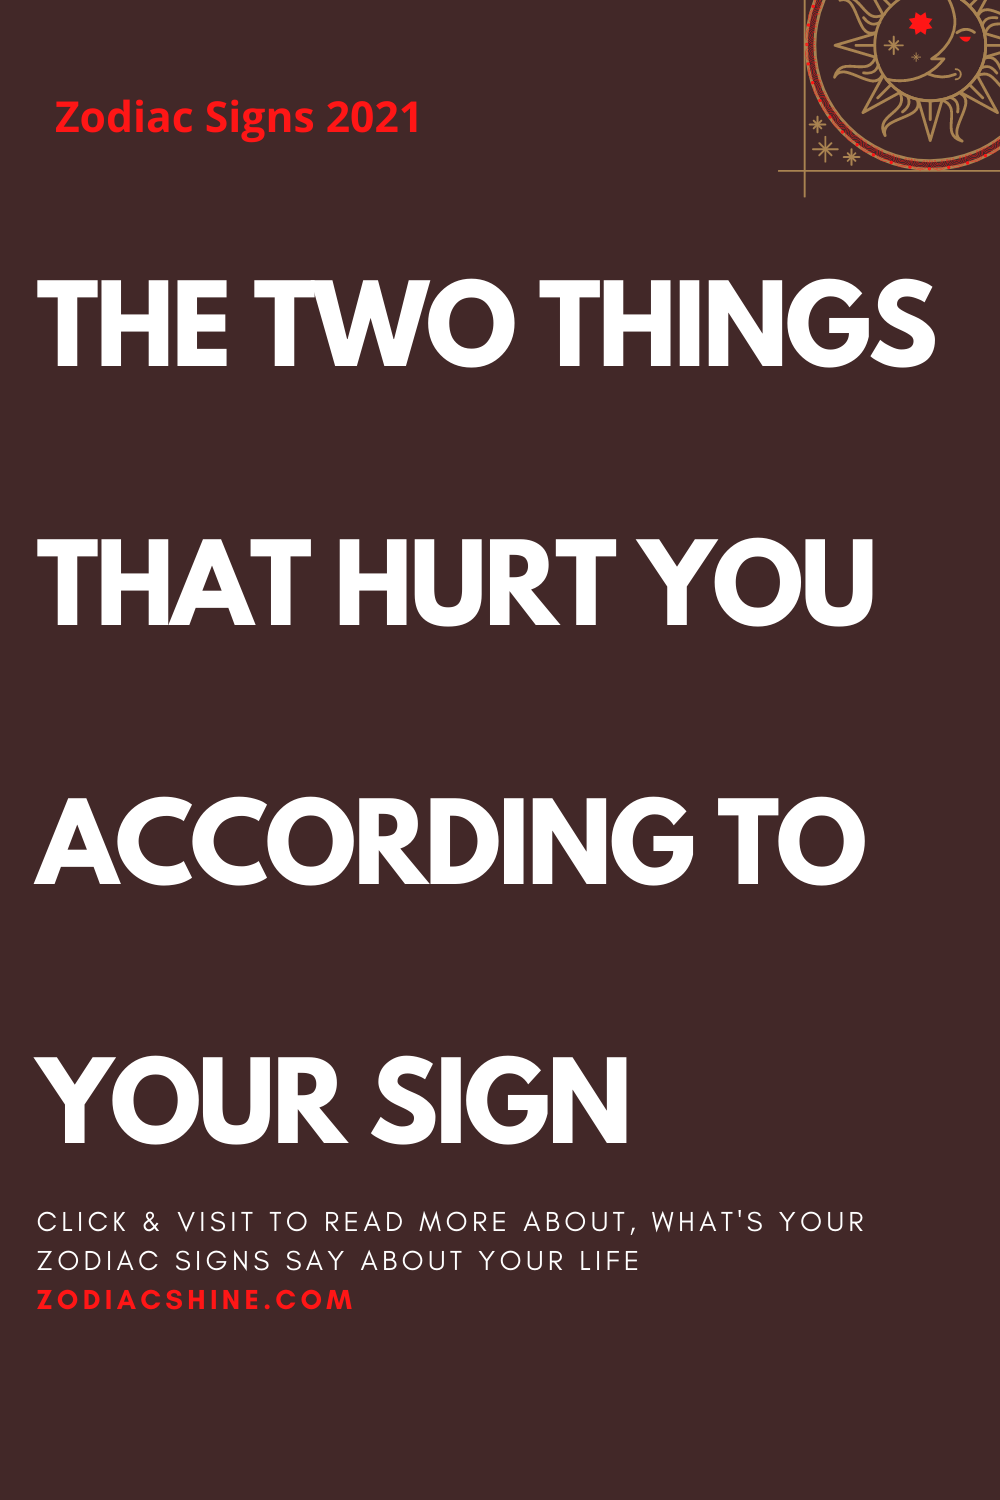 THE TWO THINGS THAT HURT YOU ACCORDING TO YOUR SIGN